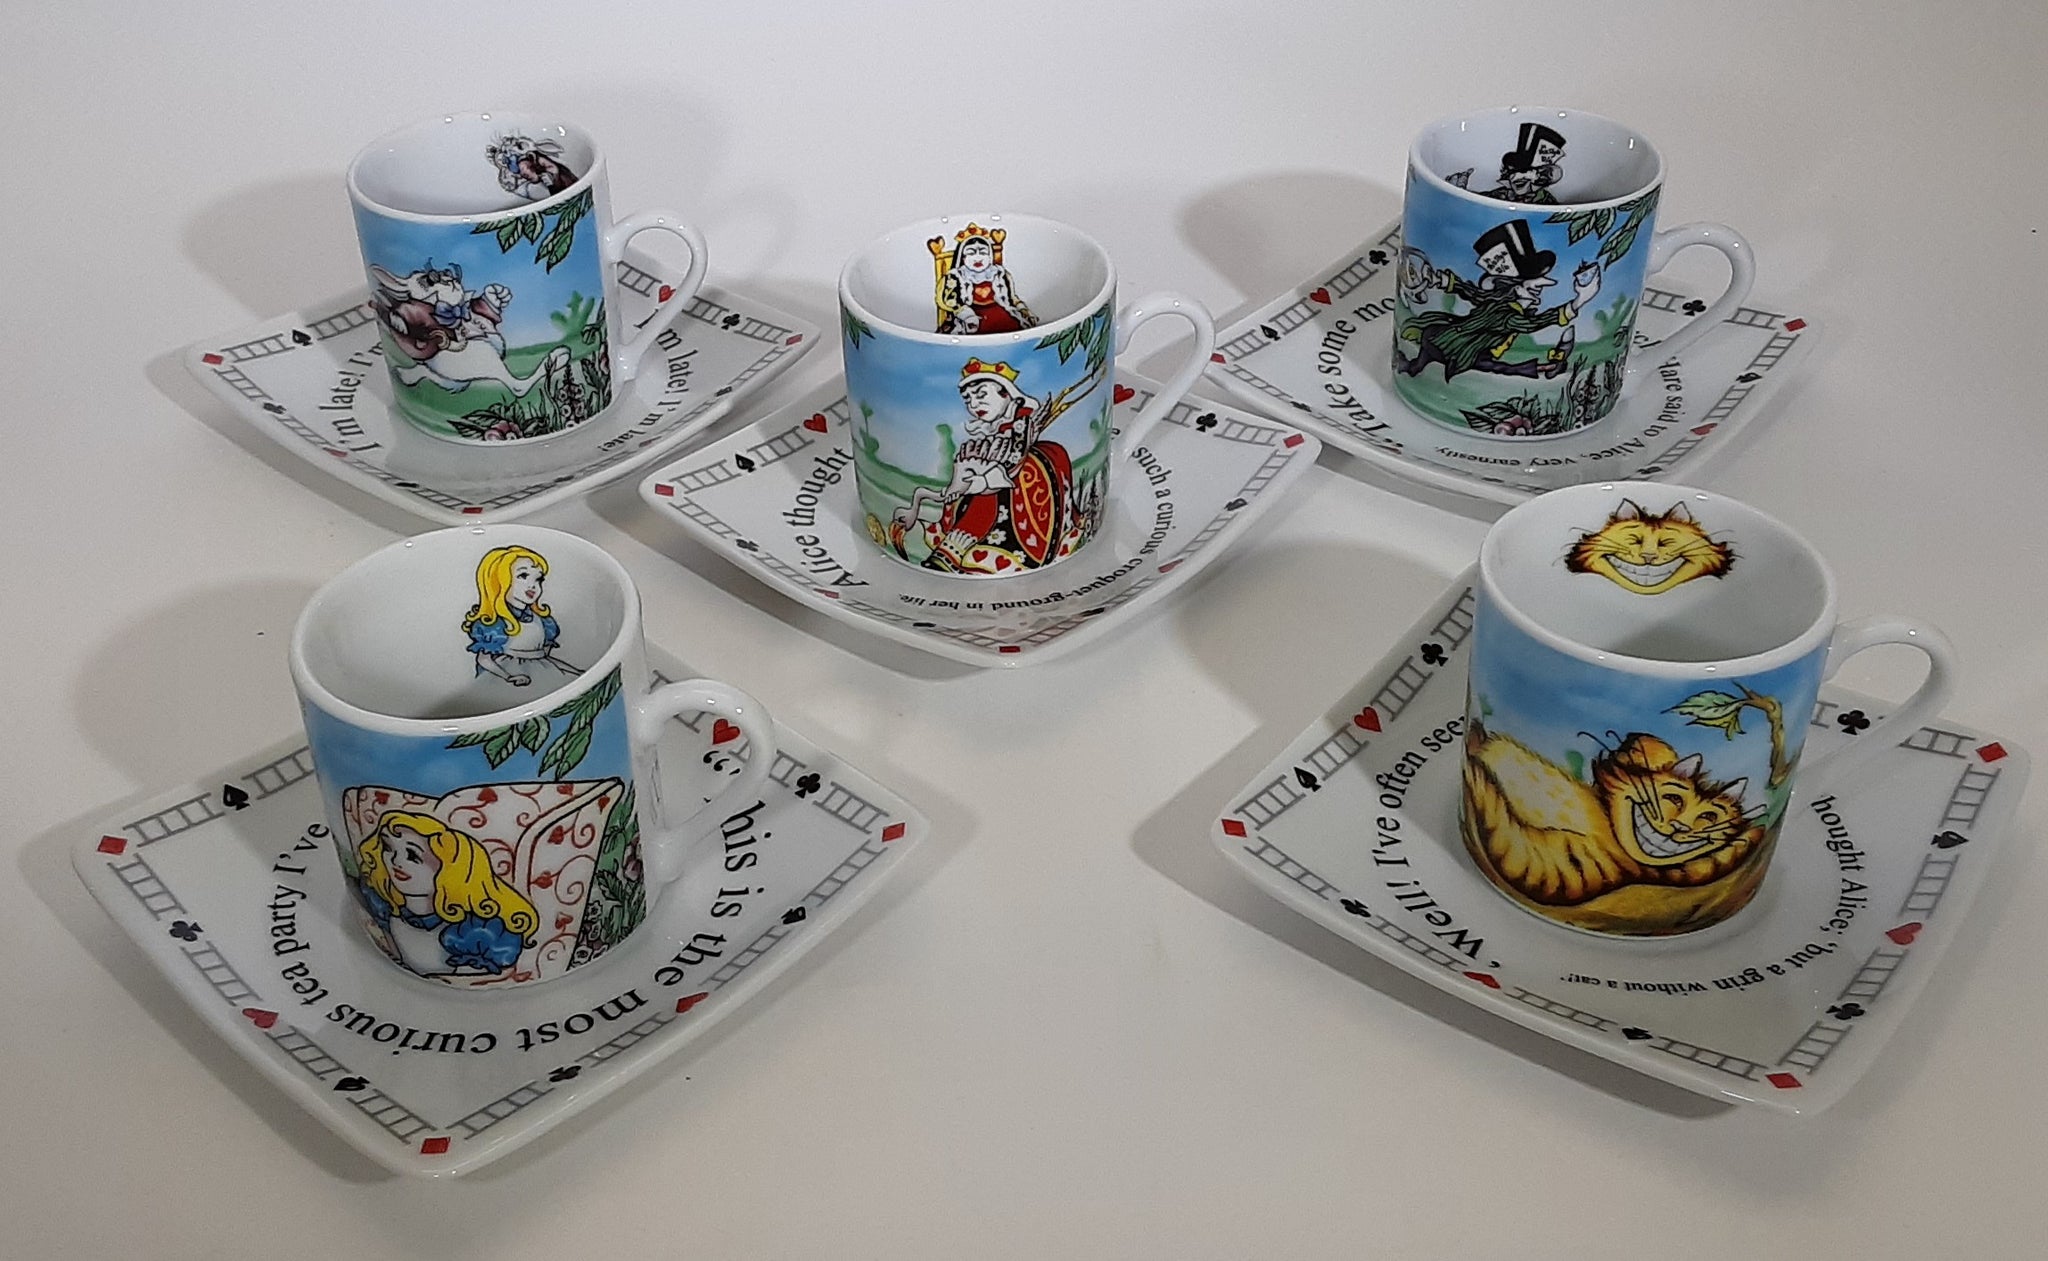 Alice in Wonderland Cup and Saucer